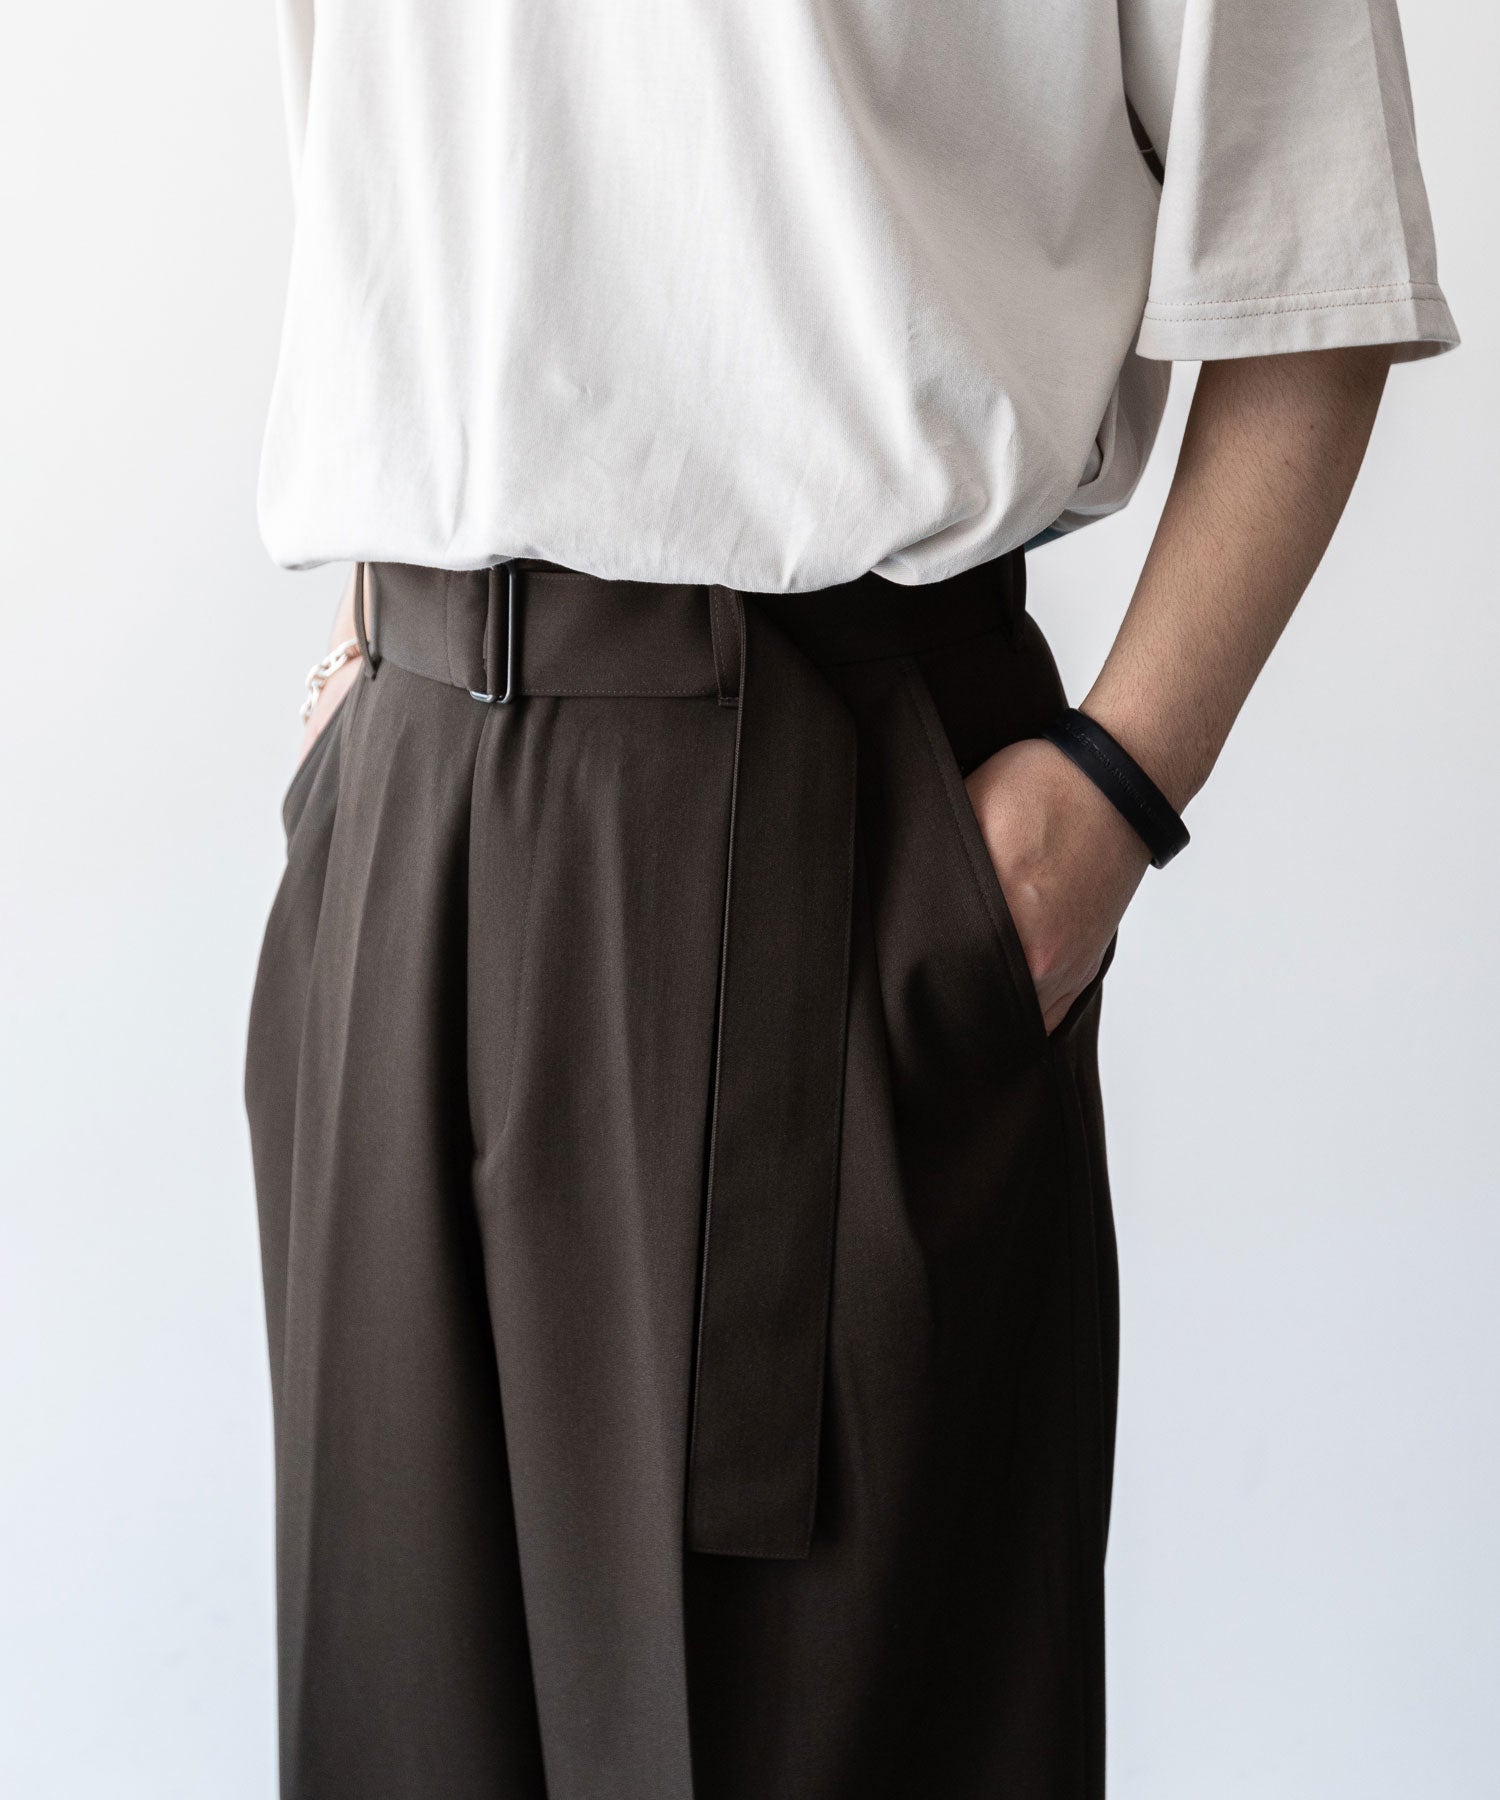 【stein】BELTED WIDE STRAIGHT TROUSERS シュタイン23aw sessionセッション福岡セレクトショップ 公式通販サイト